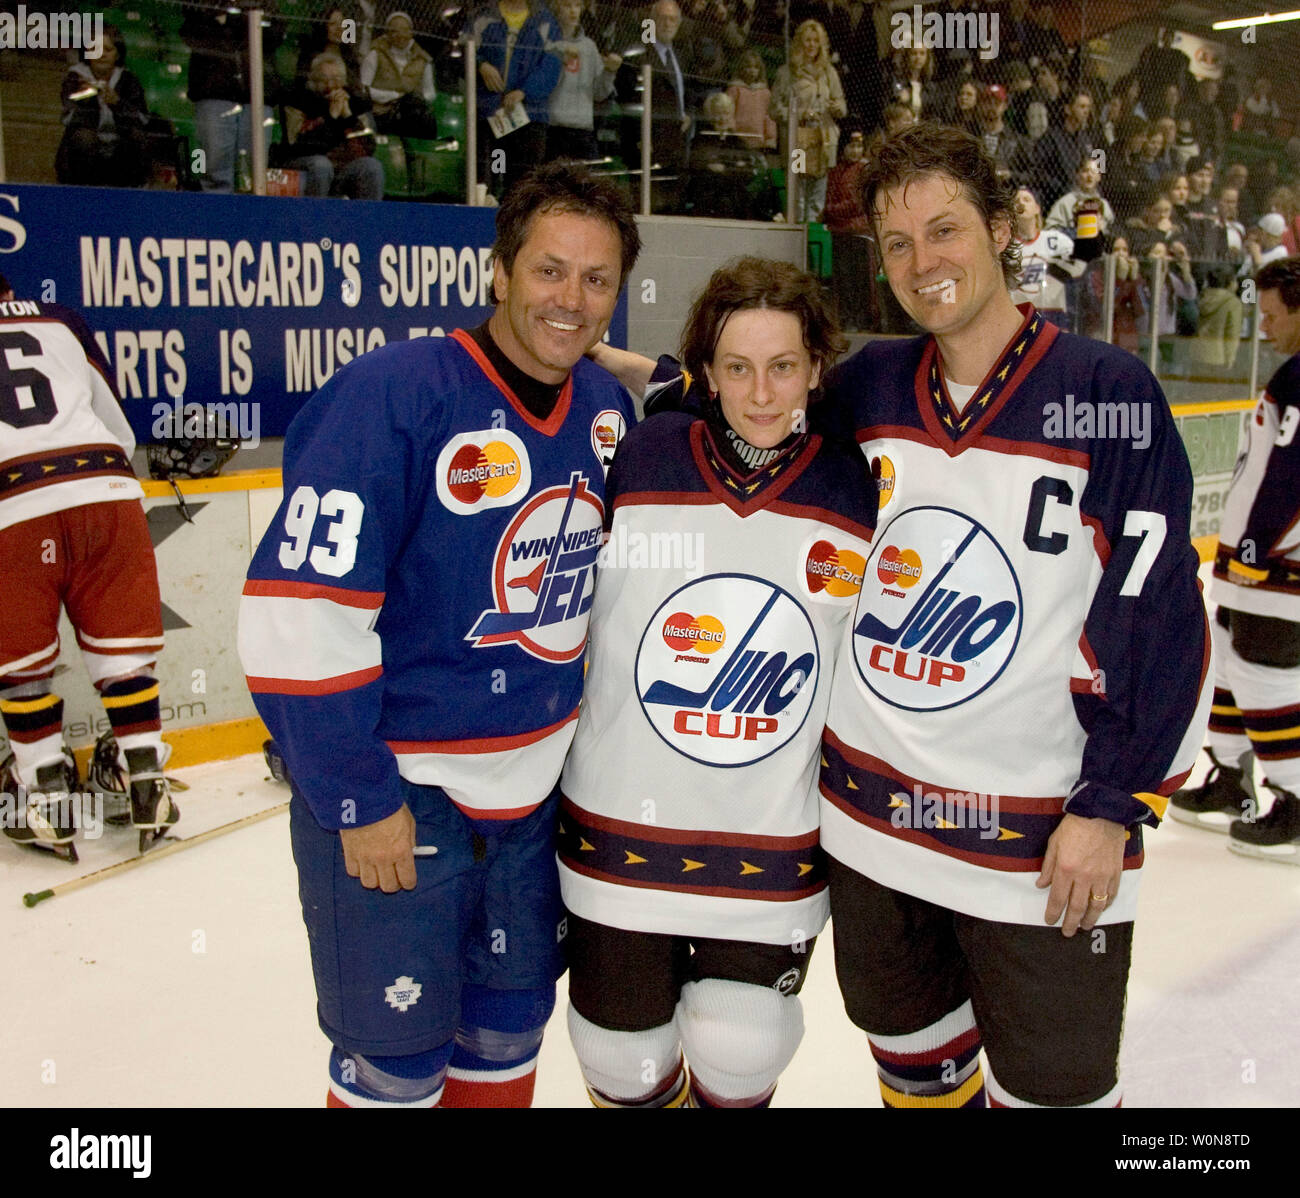 A 20-year NHL veteran, Doug Gilmore (L) with singer Sarah Harmer, nominated for Adult Alternative Album of the Year with 'All of Our Names' and Jim Cuddy of the band Blue Rodeo nominated for Music DVD of the Year, after a charity hockey game, during the 2005 Canadian Juno Music Awards in Winnipeg, April 1,2005.        (UPI Photo / Heinz Ruckemann) Stock Photo